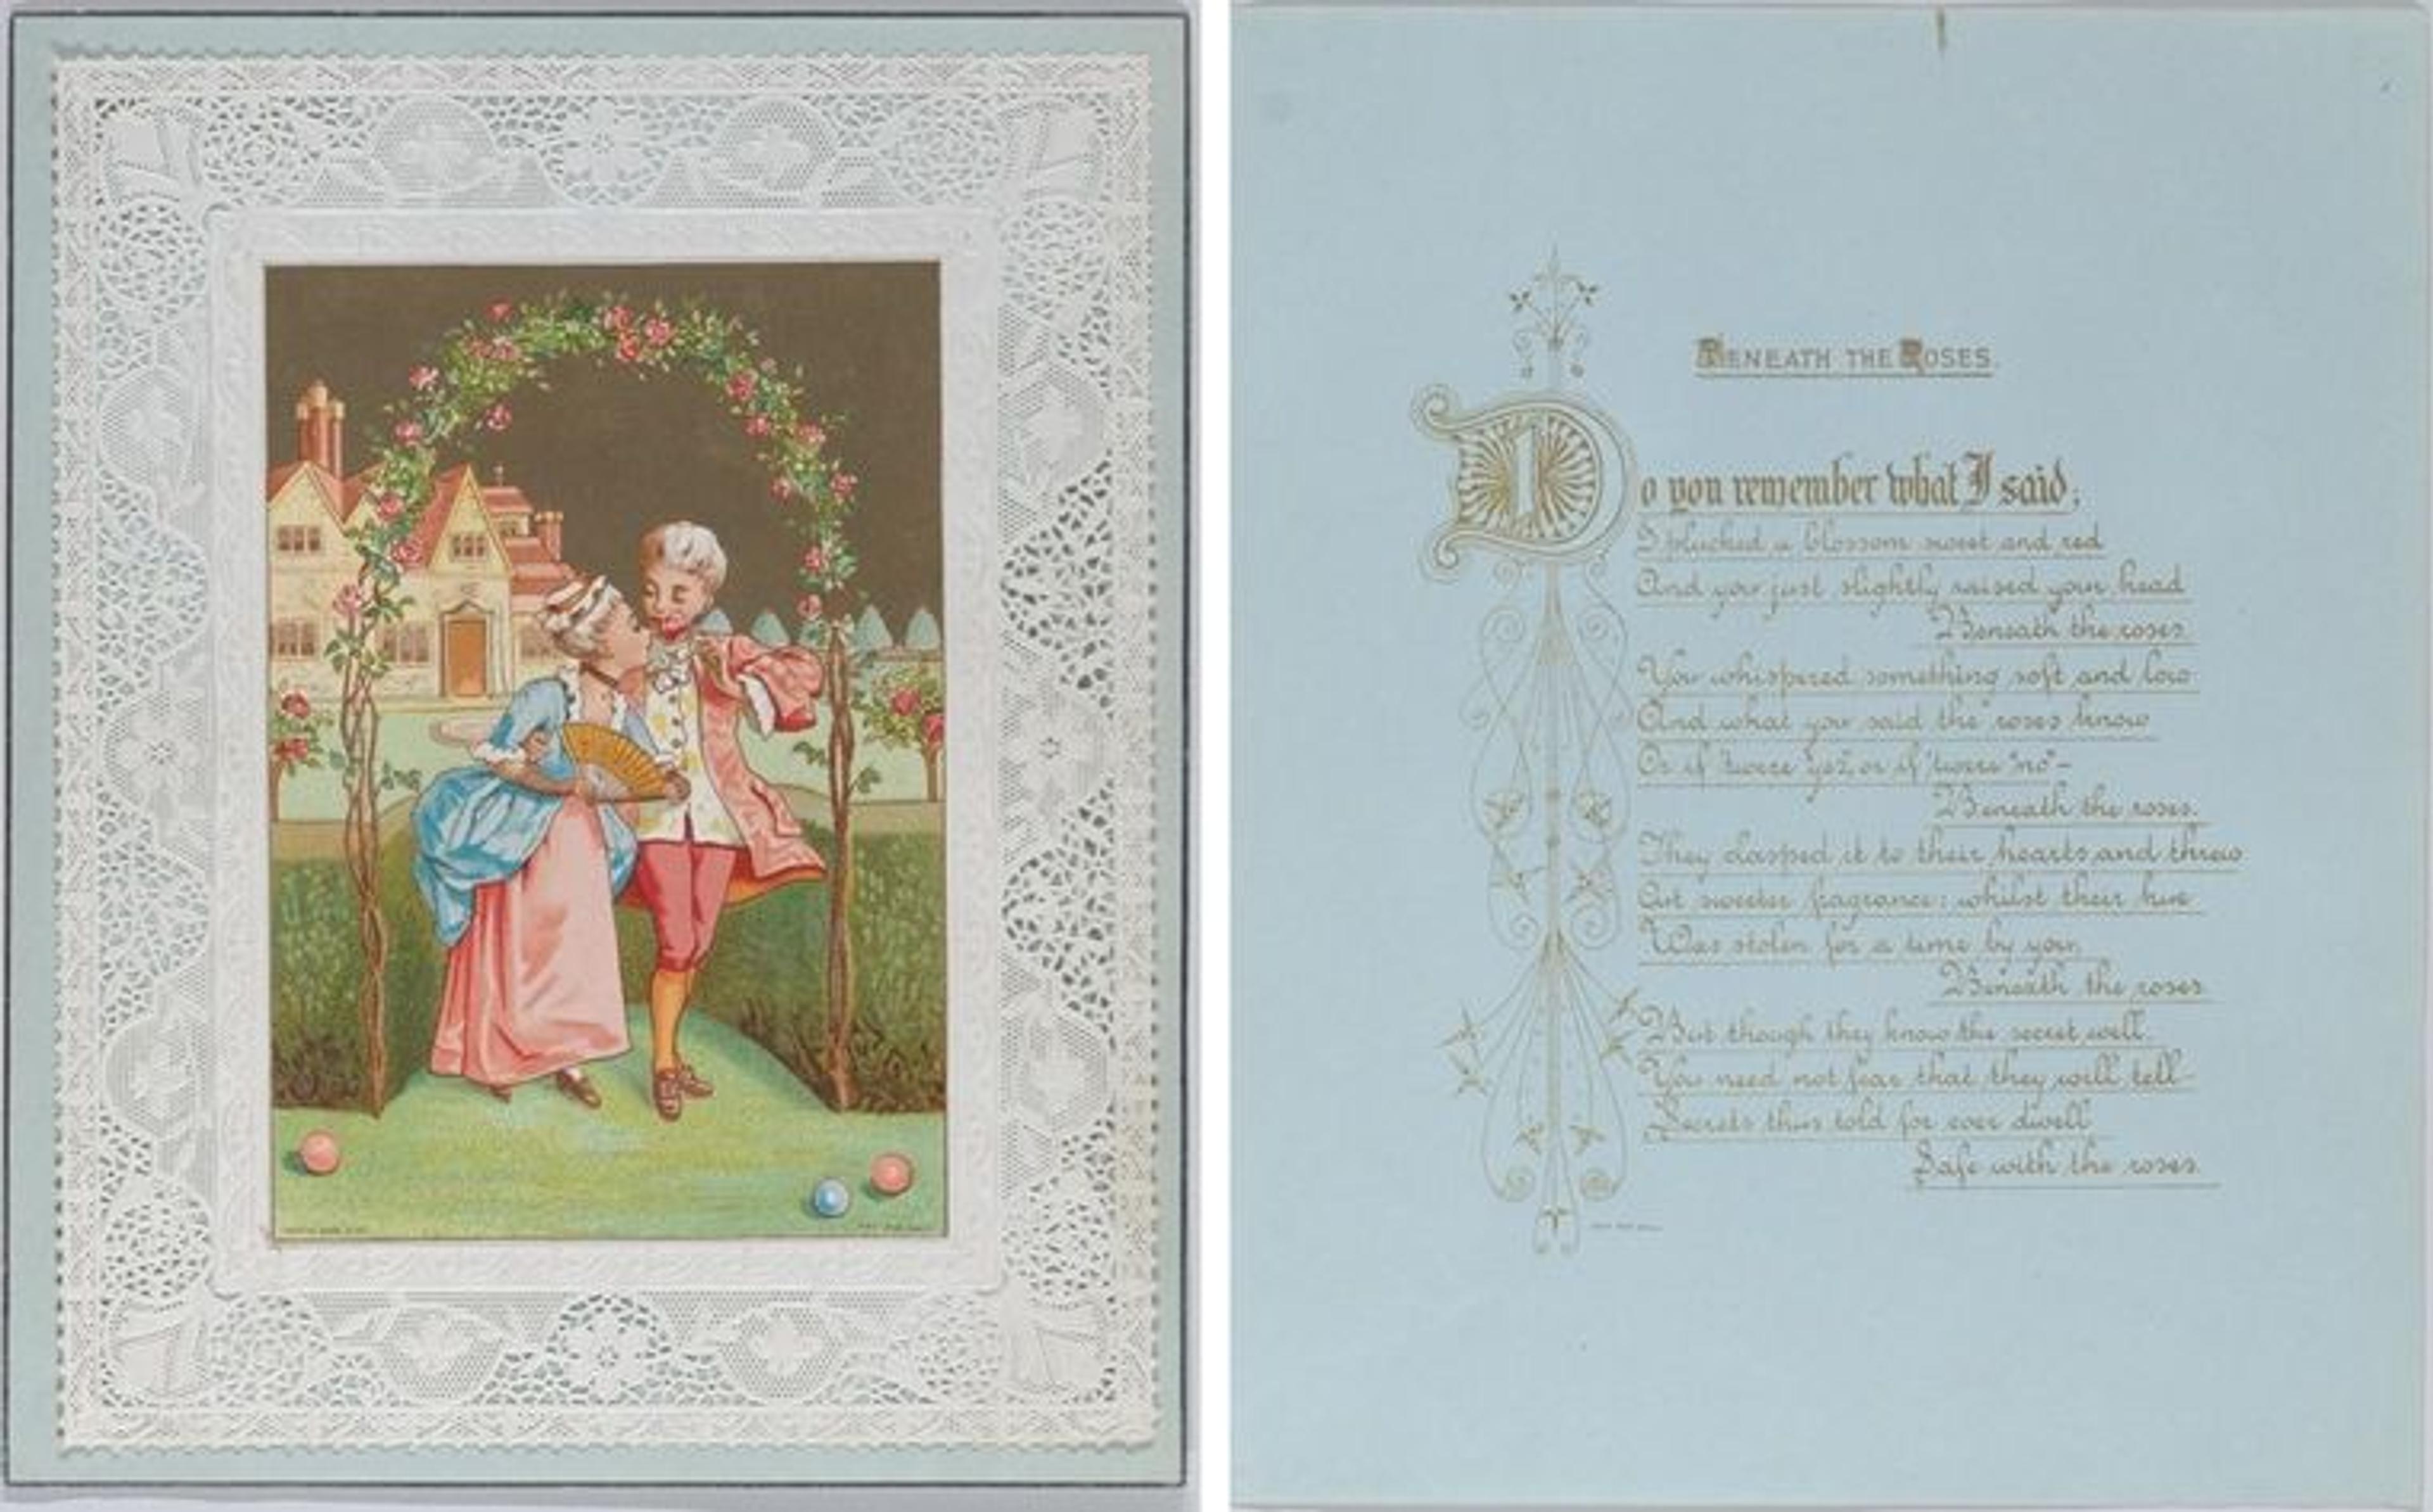 Front and back of a Kate Greenaway valentine. On the front, two young lovers in Rococo dress stroll through a floral arch; on the back, a poem entitled "Beneath the Roses"